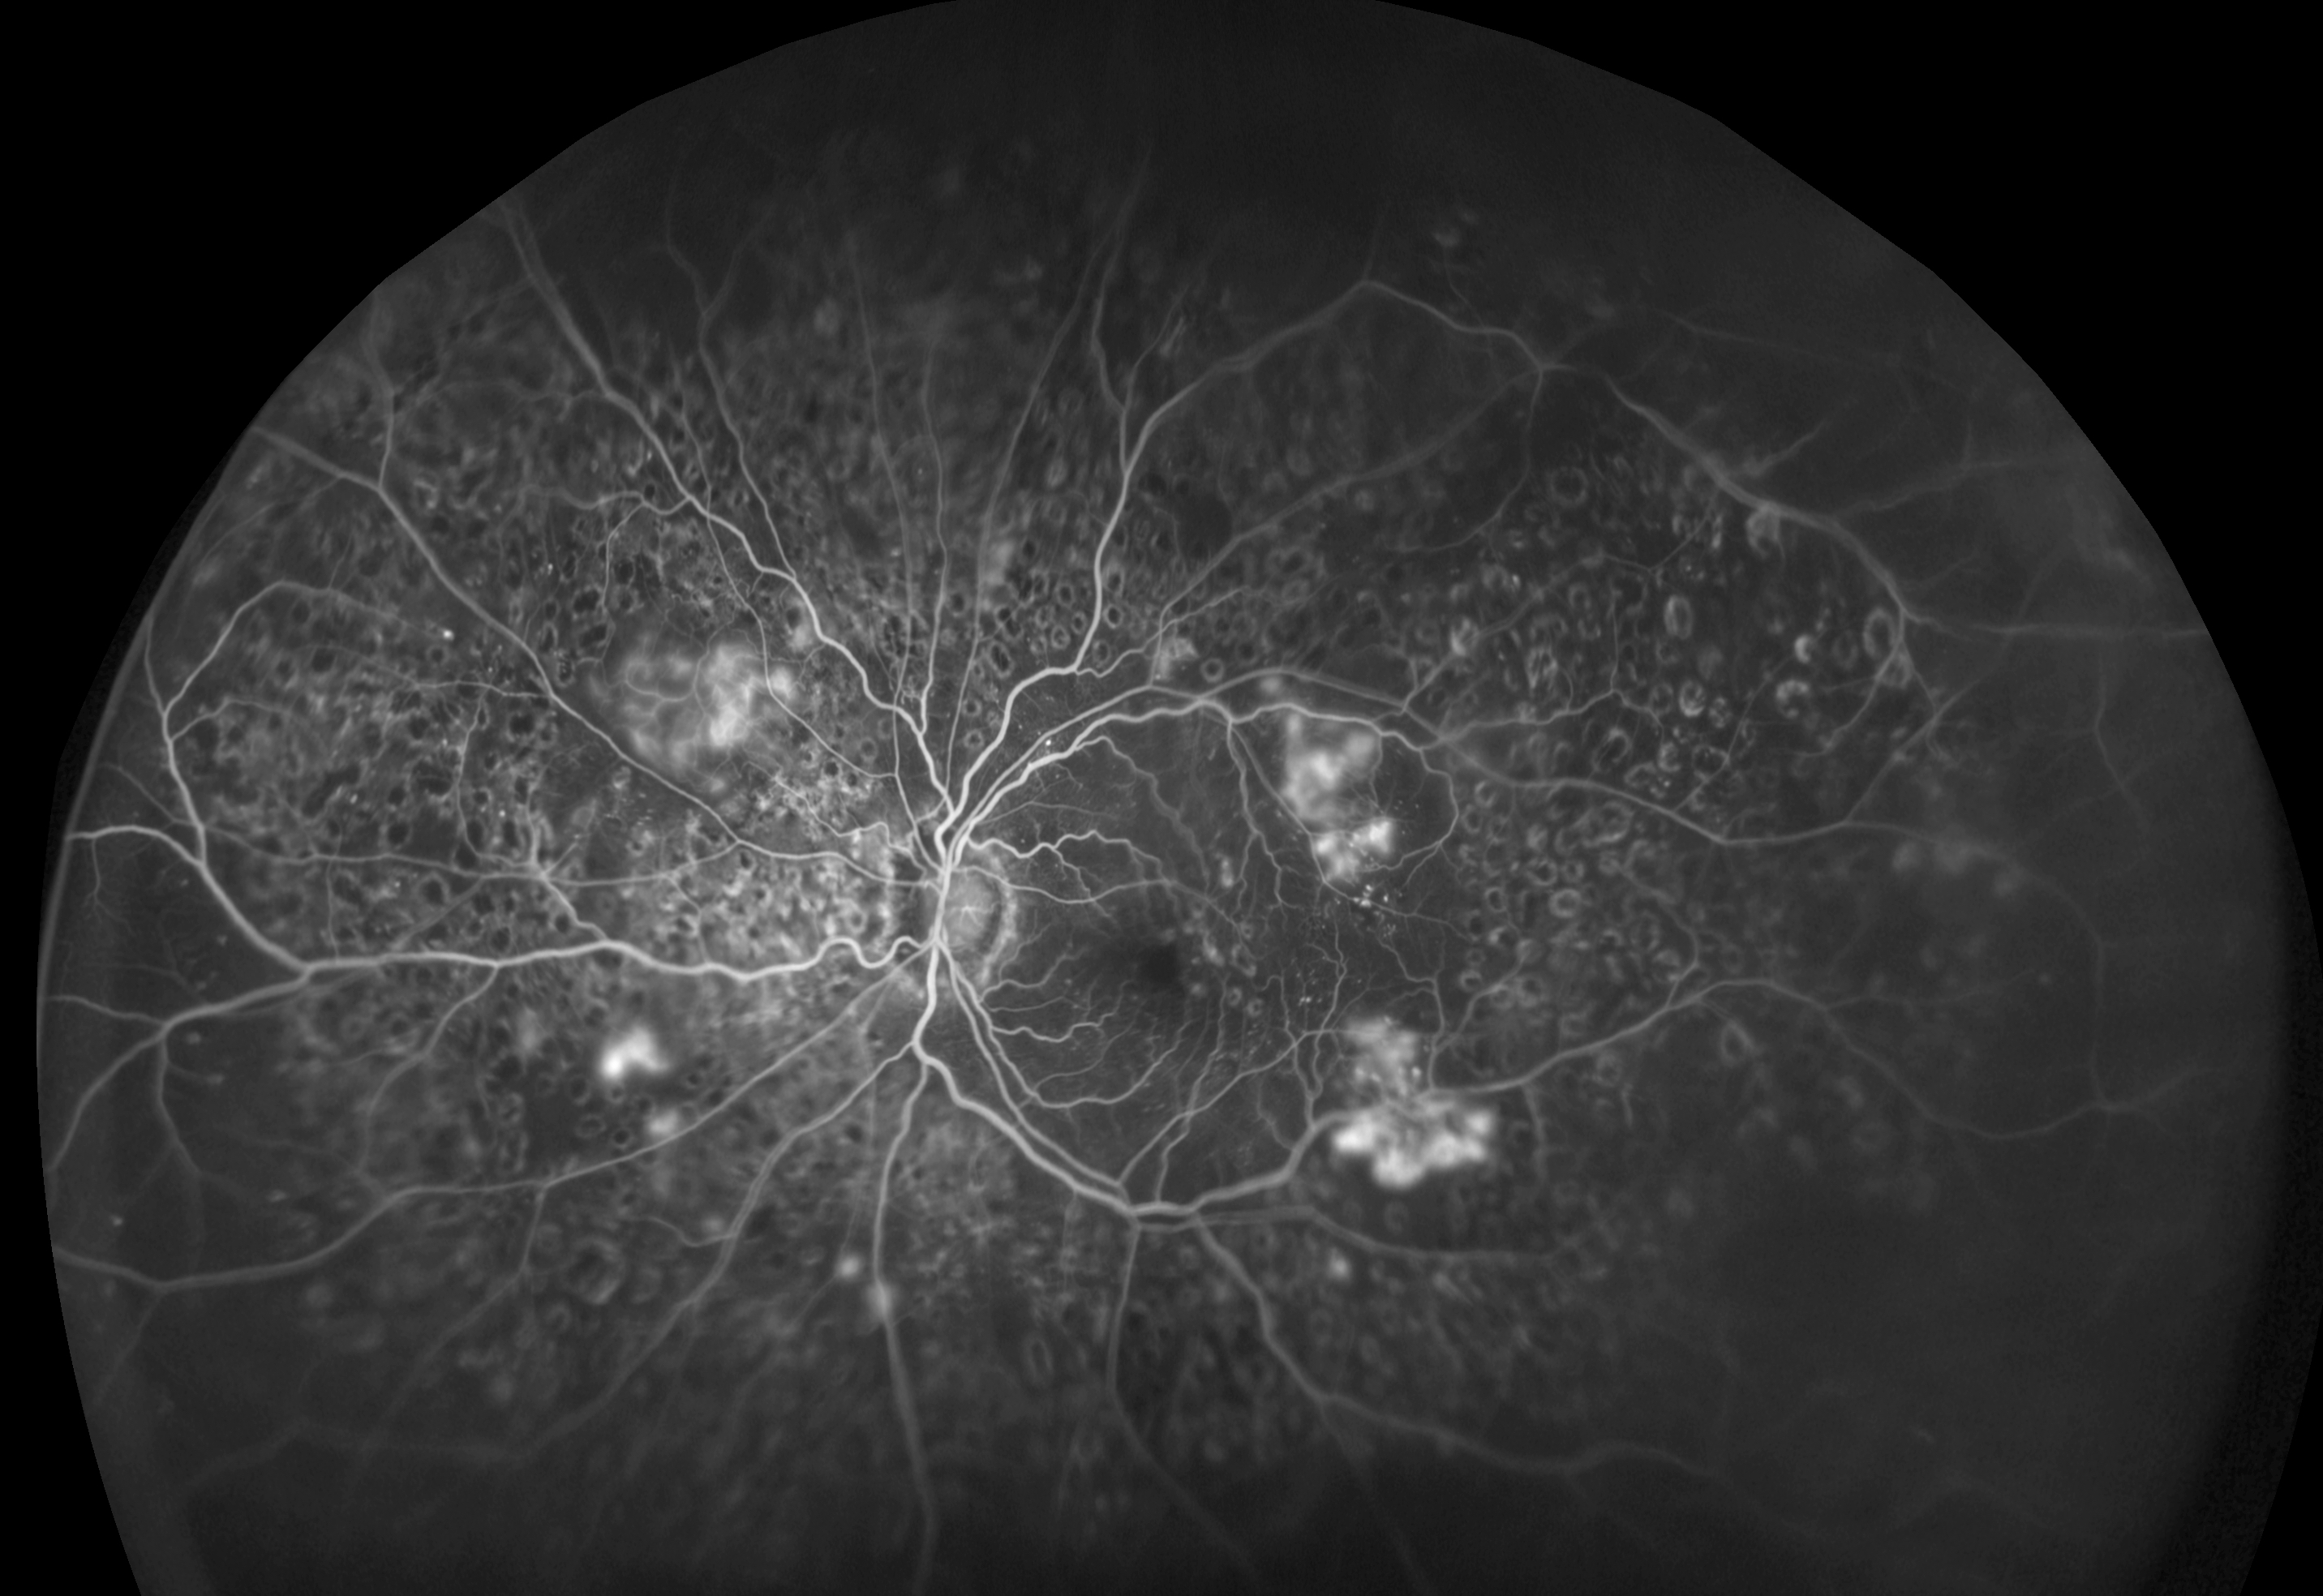 Severe proliferative diabetic retinopathy may go undetected in patients with severe mental illness, as these patients often don’t see an eye doctor until it’s too late.